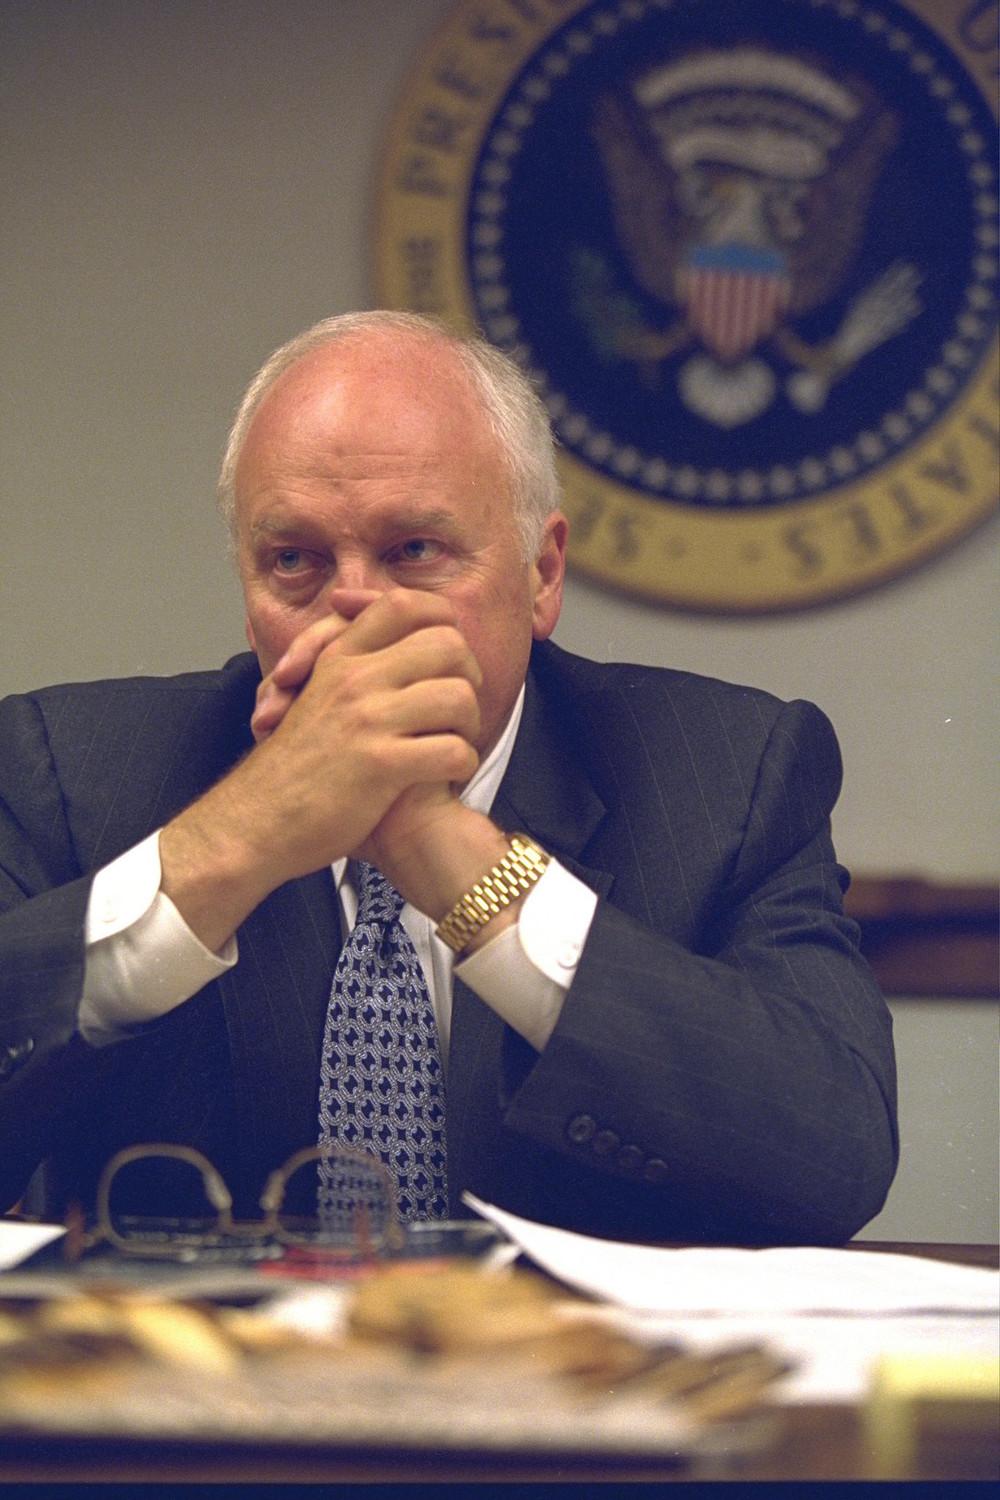 the-national-archive-just-released-photos-of-dick-cheney-during-911-265-578-1437773910-size_1000.jpg